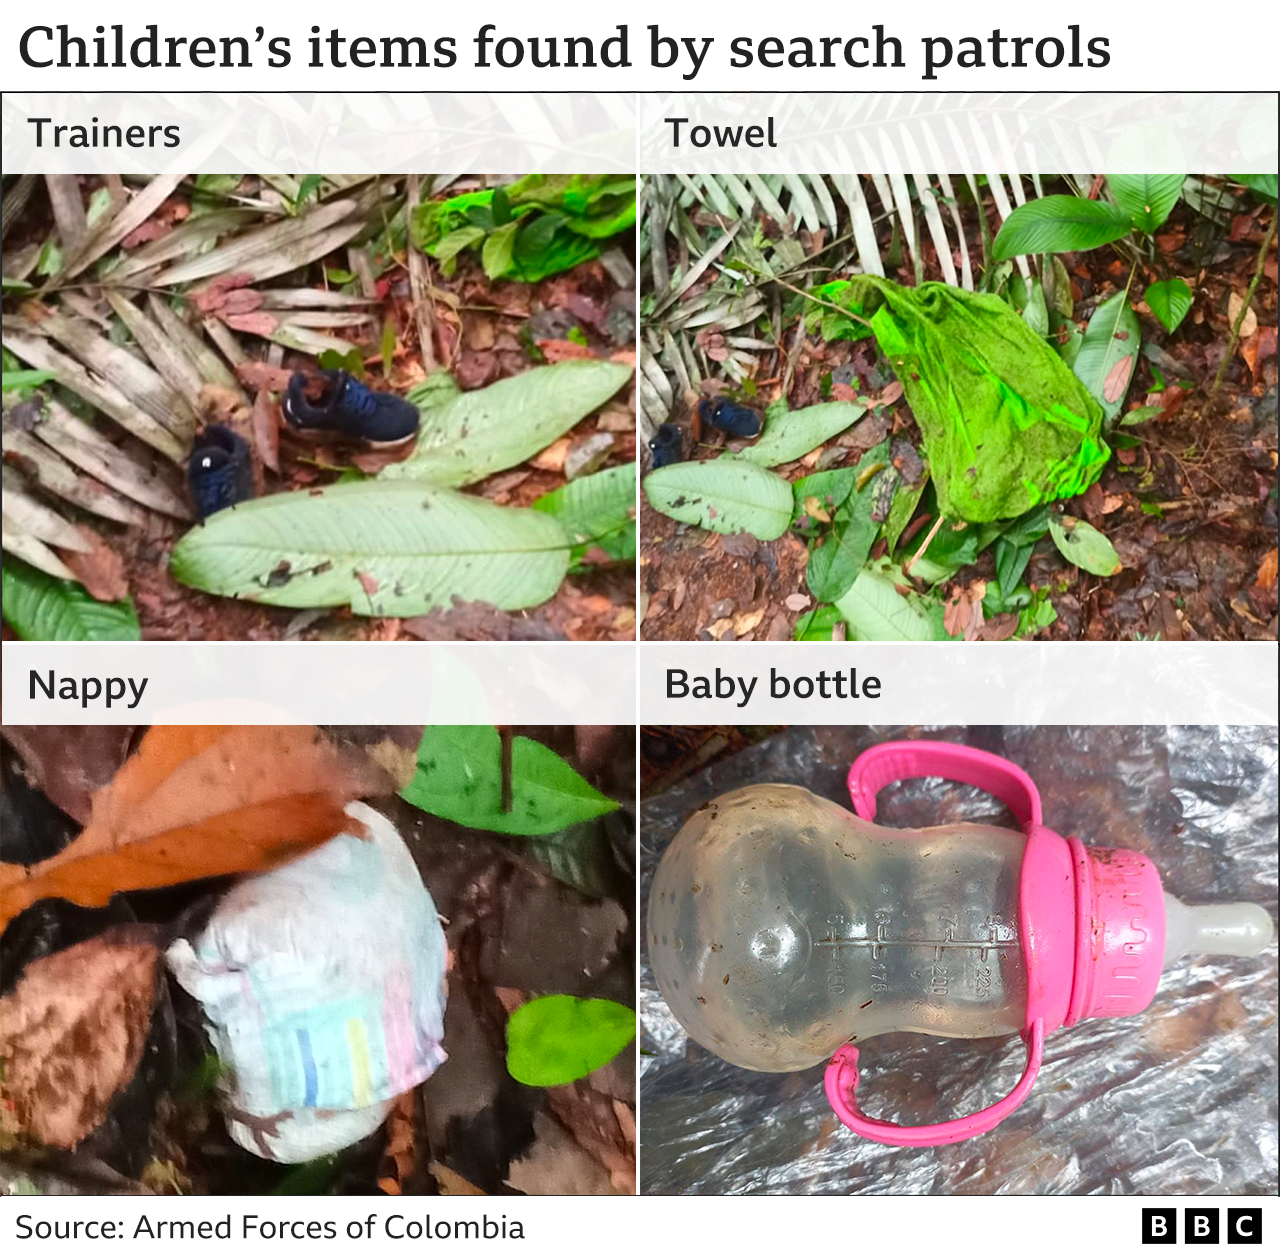 Some of the items found in the jungle - shoes, a towel, a nappy and a baby bottle